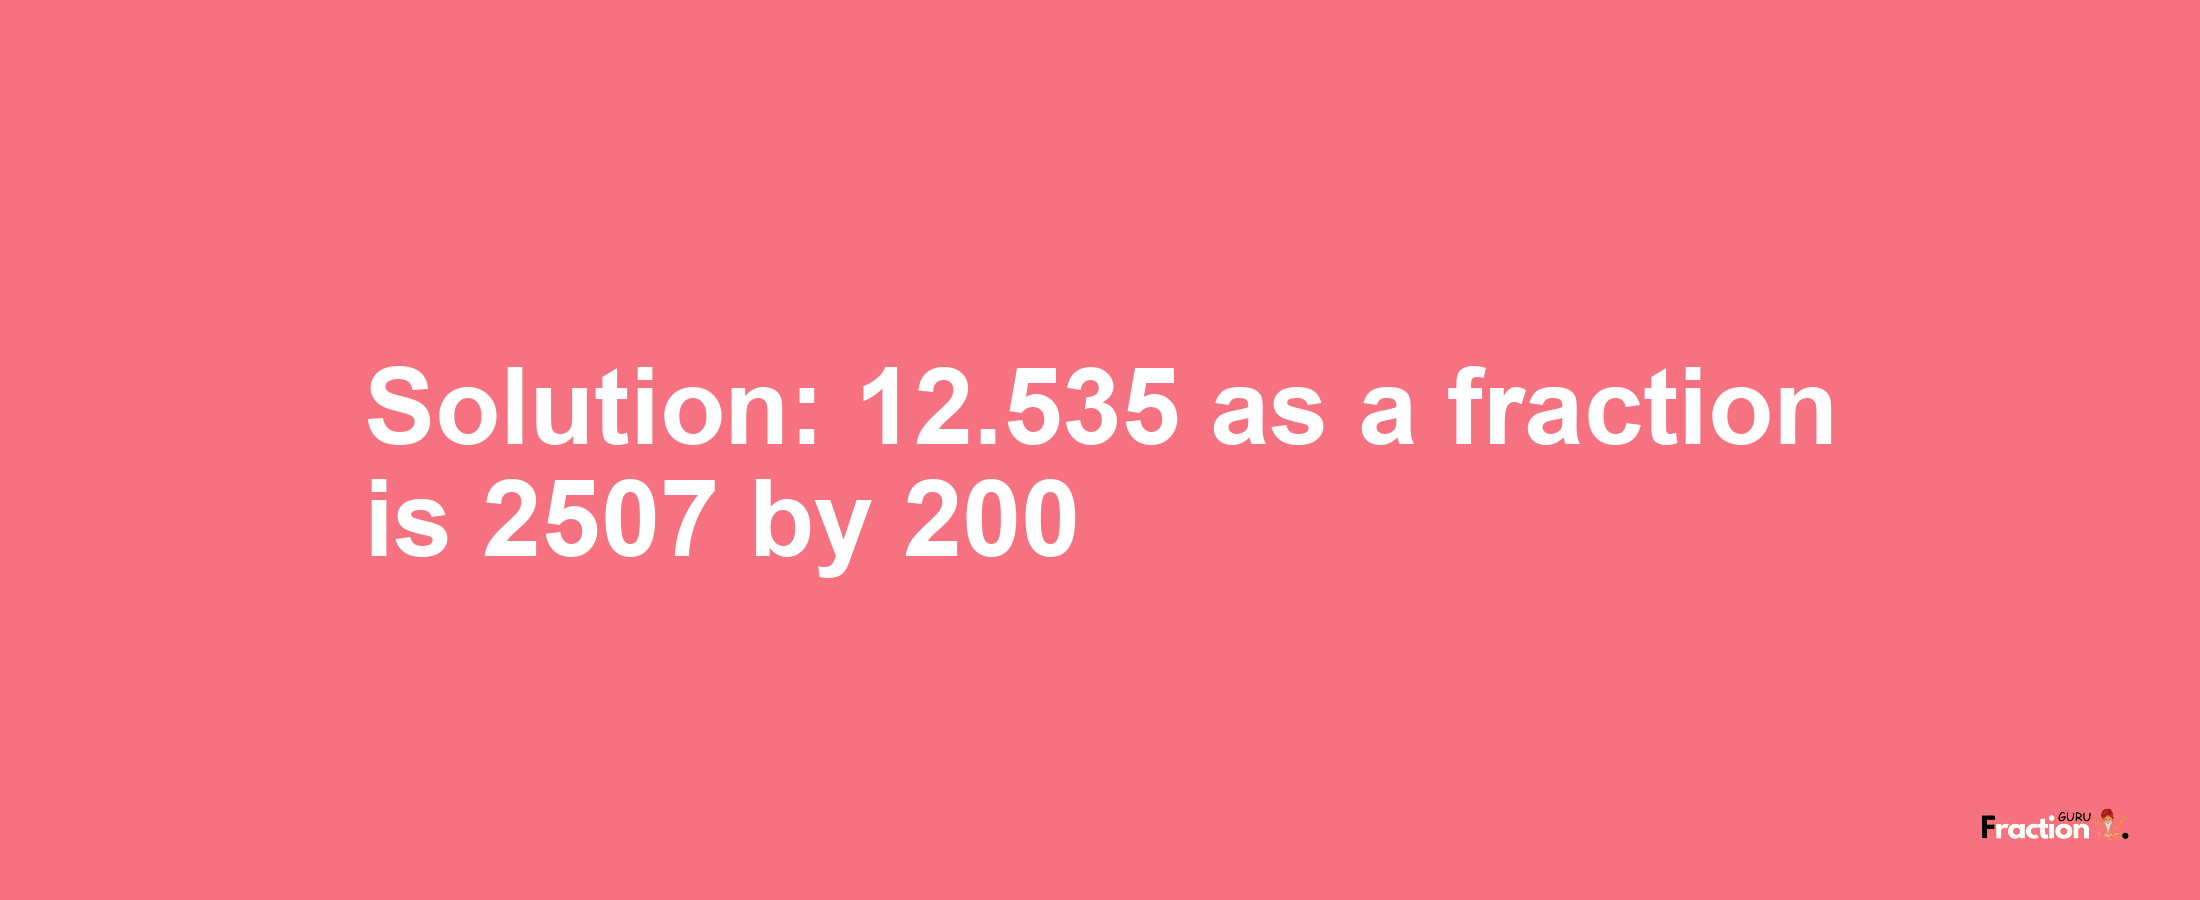 Solution:12.535 as a fraction is 2507/200